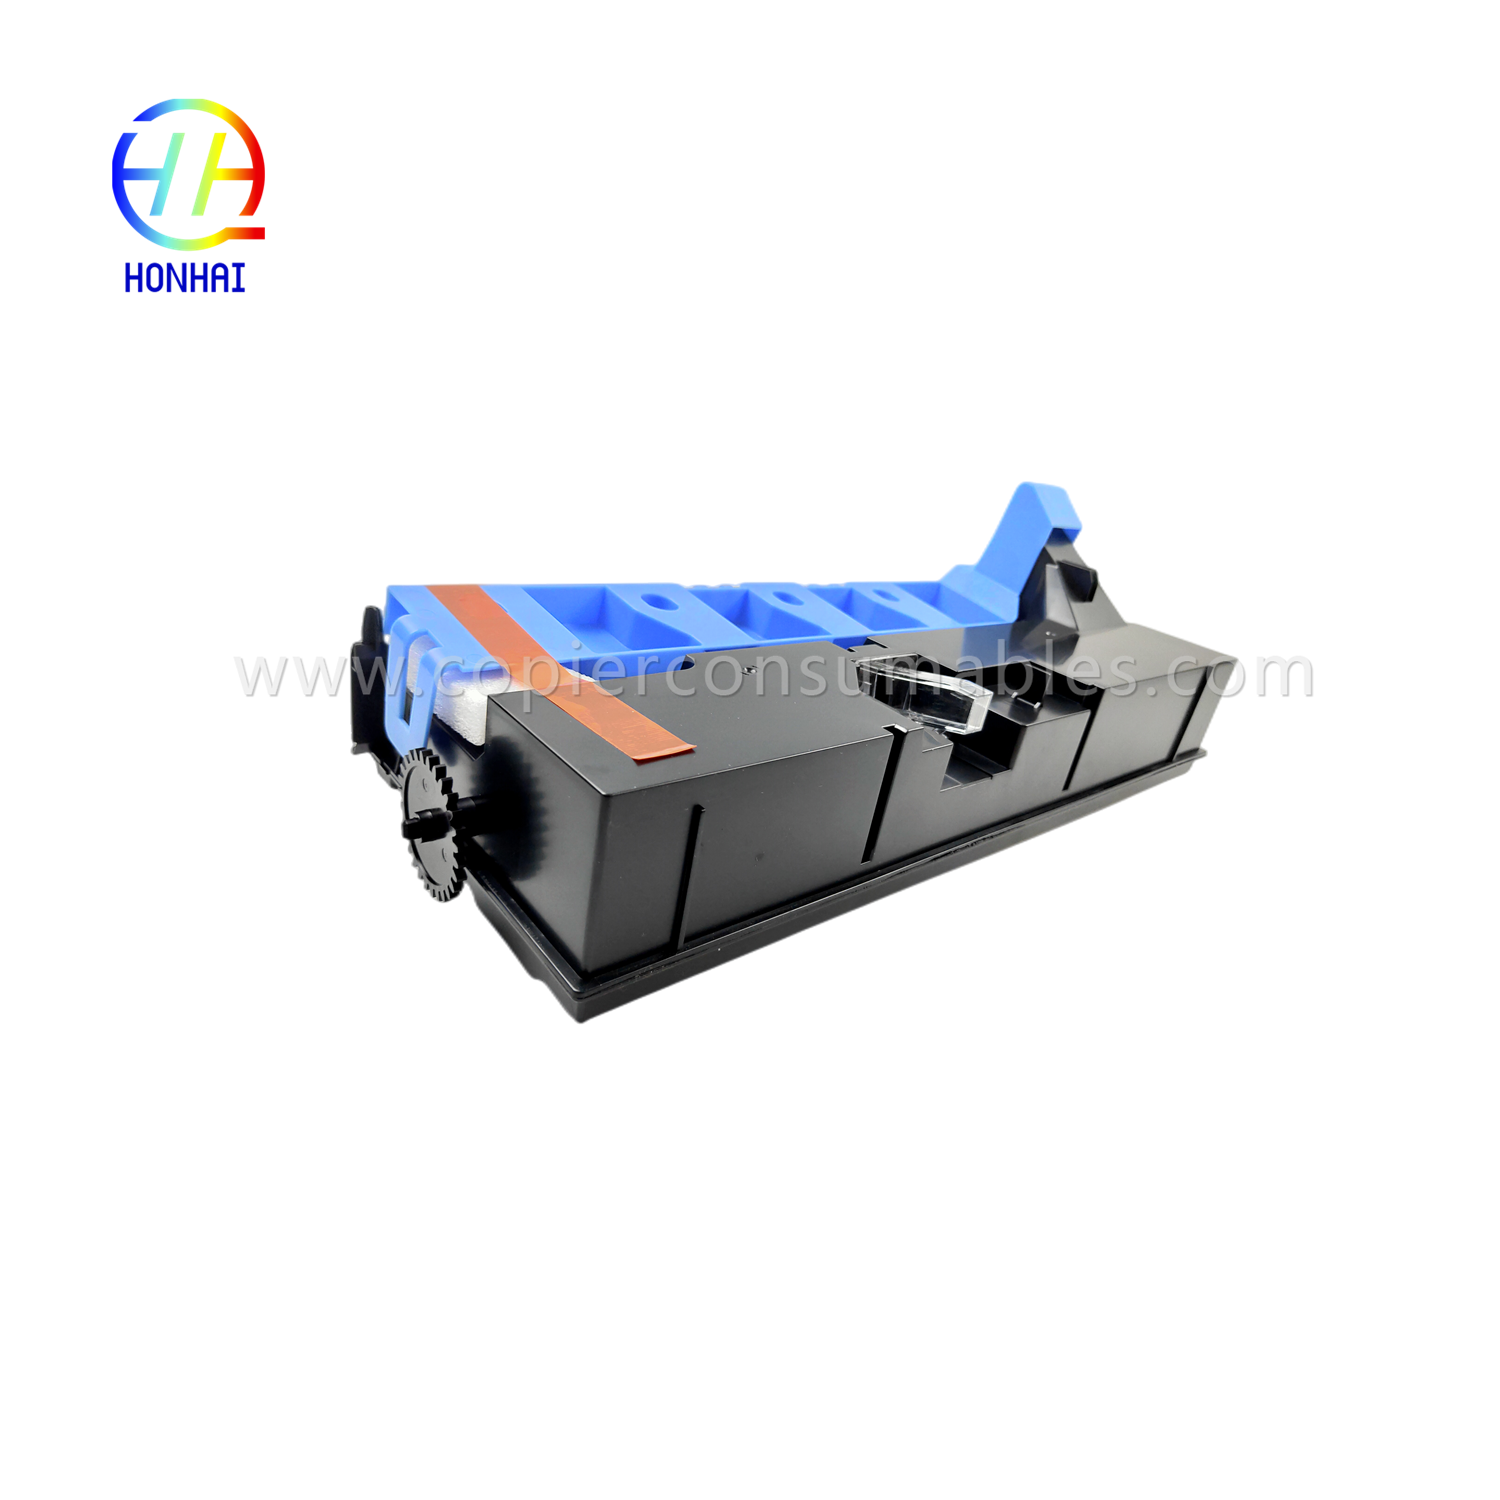 https://c585.goodao.net/waste-toner-container-for-konica-minolta-bizhub-c226-c256-c266-c227-c287-c367-c7333-c7226-c7528-wx-105-a8jjwy1-waste-toner-box-product/